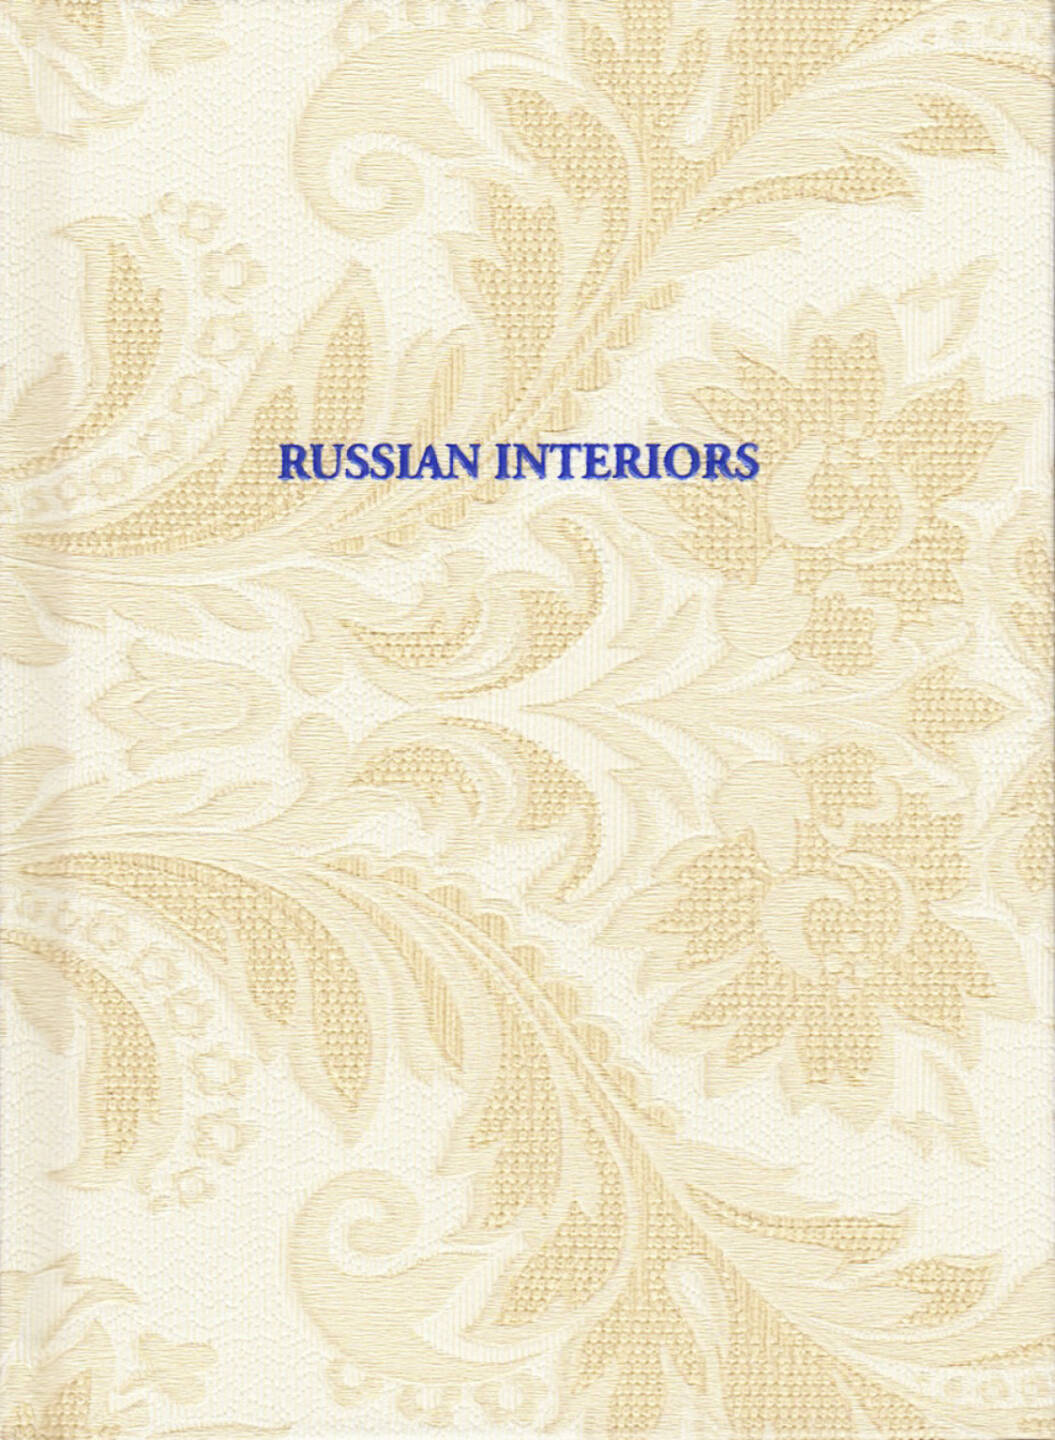 Andy Rocchelli - Russian Interiors (2014), 290-350 Euro, http://josefchladek.com/book/andy_rocchelli_-_russian_interiors